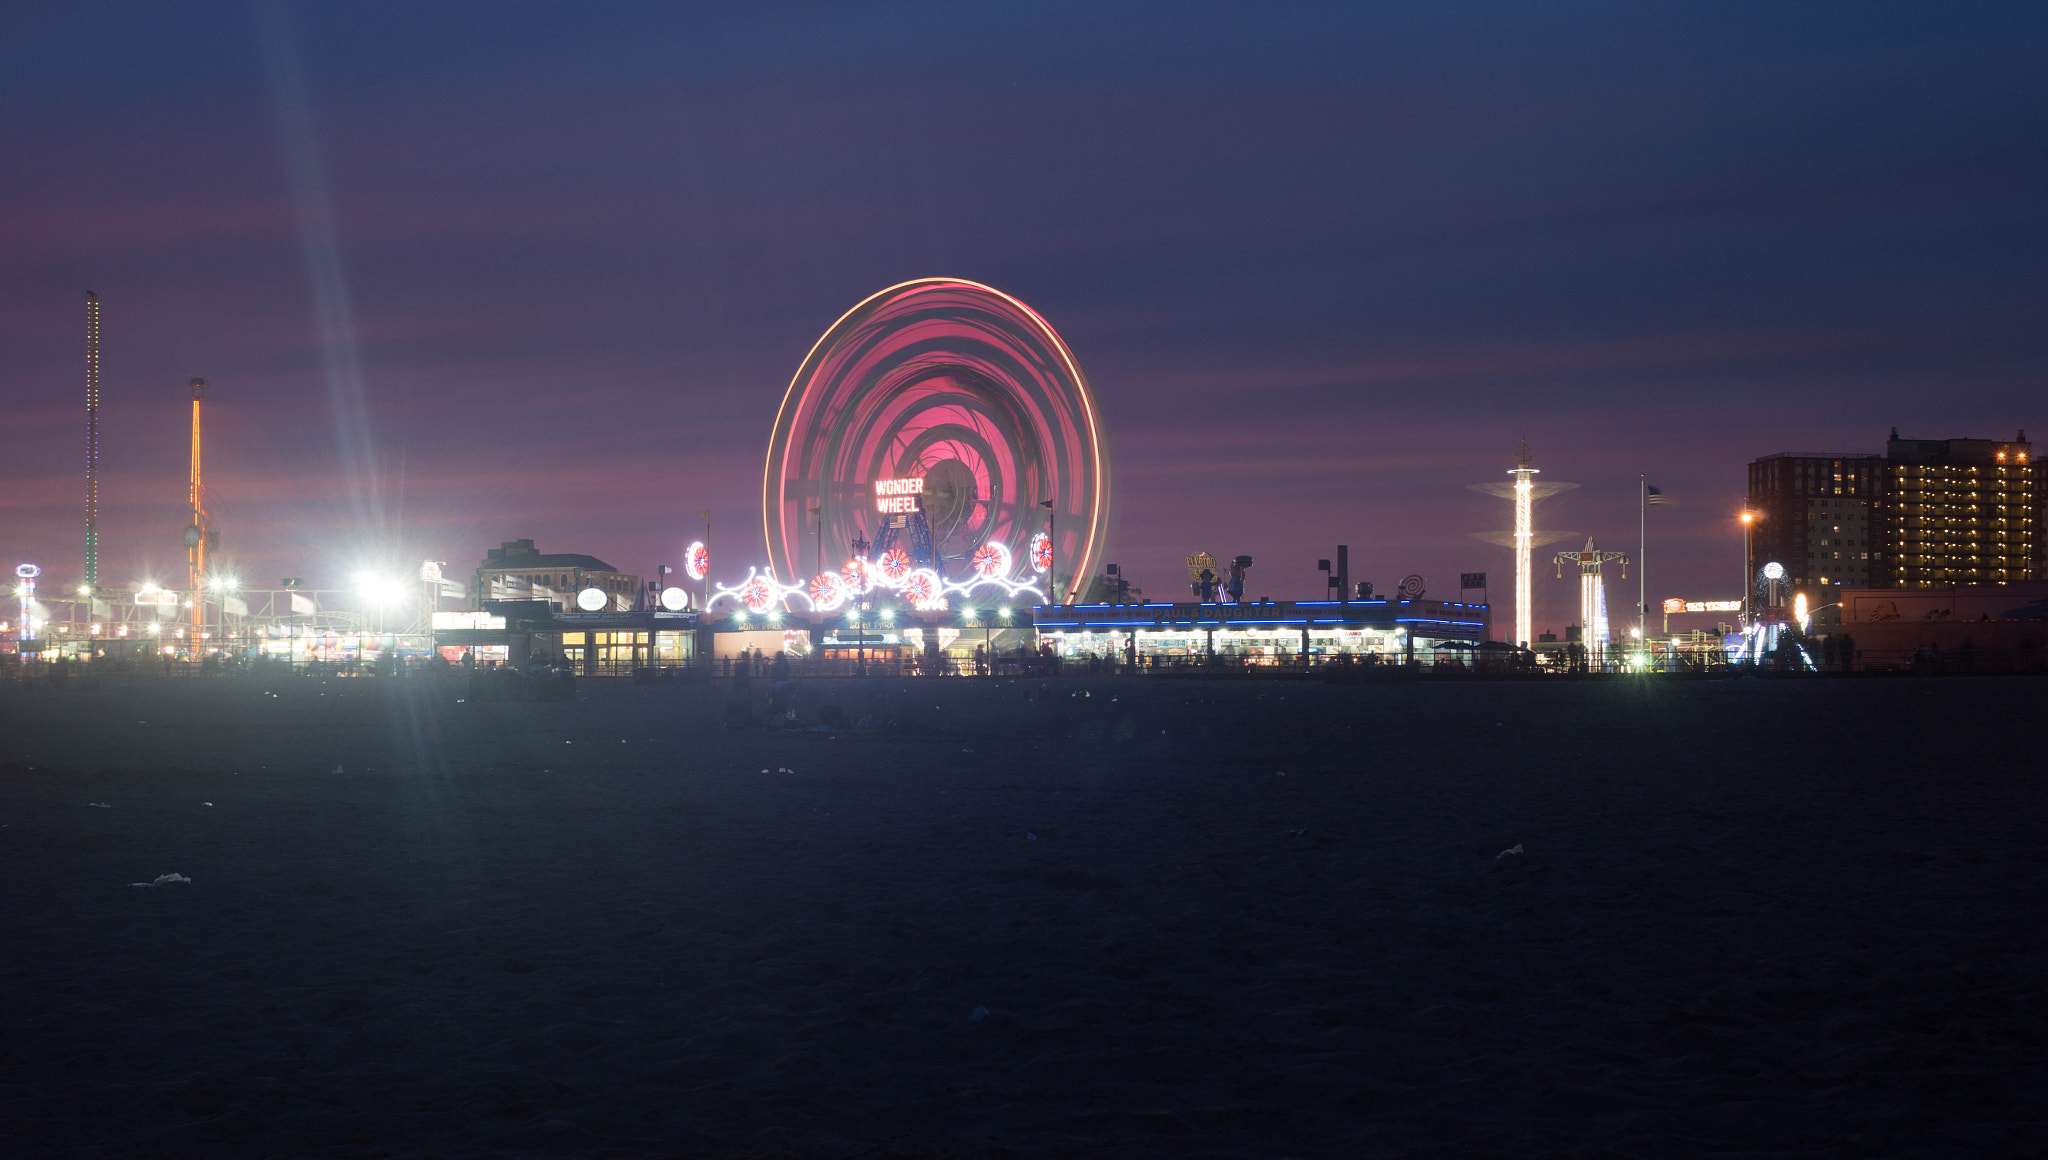 Nikon D3200 + Nikon AF Nikkor 28mm F2.8D sample photo. Photo was taken last night at coney island, brooklyn ny. light trails from the ferris wheel. photography